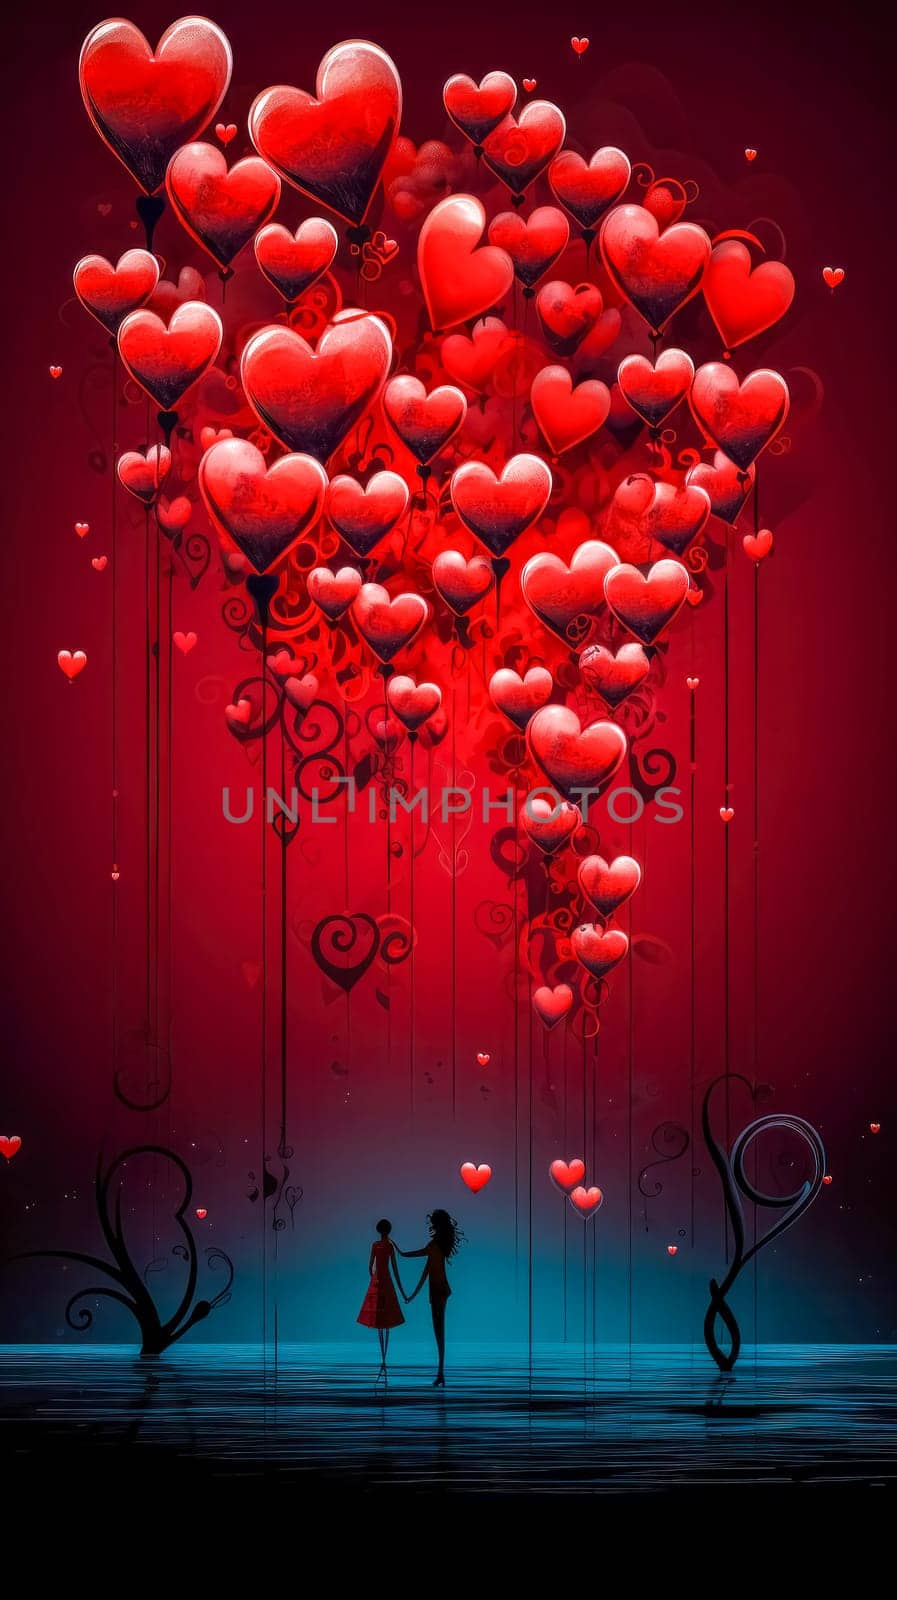 love of two women, romantic depiction of Valentine's Day, featuring a couple holding hands amidst a dreamy backdrop of floating red hearts of various sizes, atmosphere of love and enchantment by Edophoto